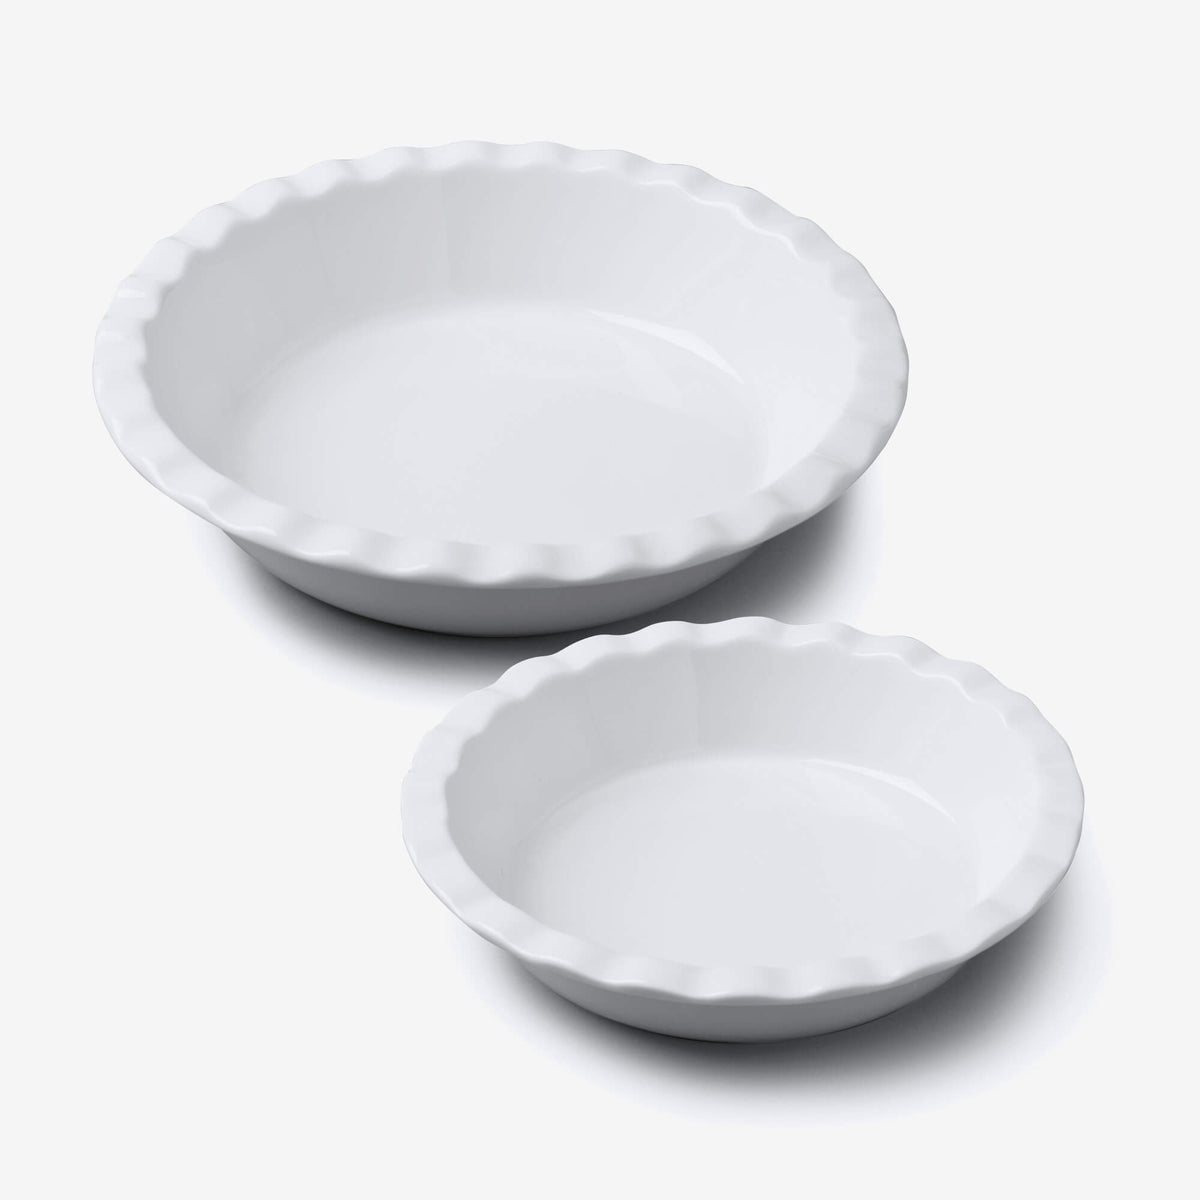 Porcelain Round Pie Dish with Crinkle Crust Rim, Set of 2